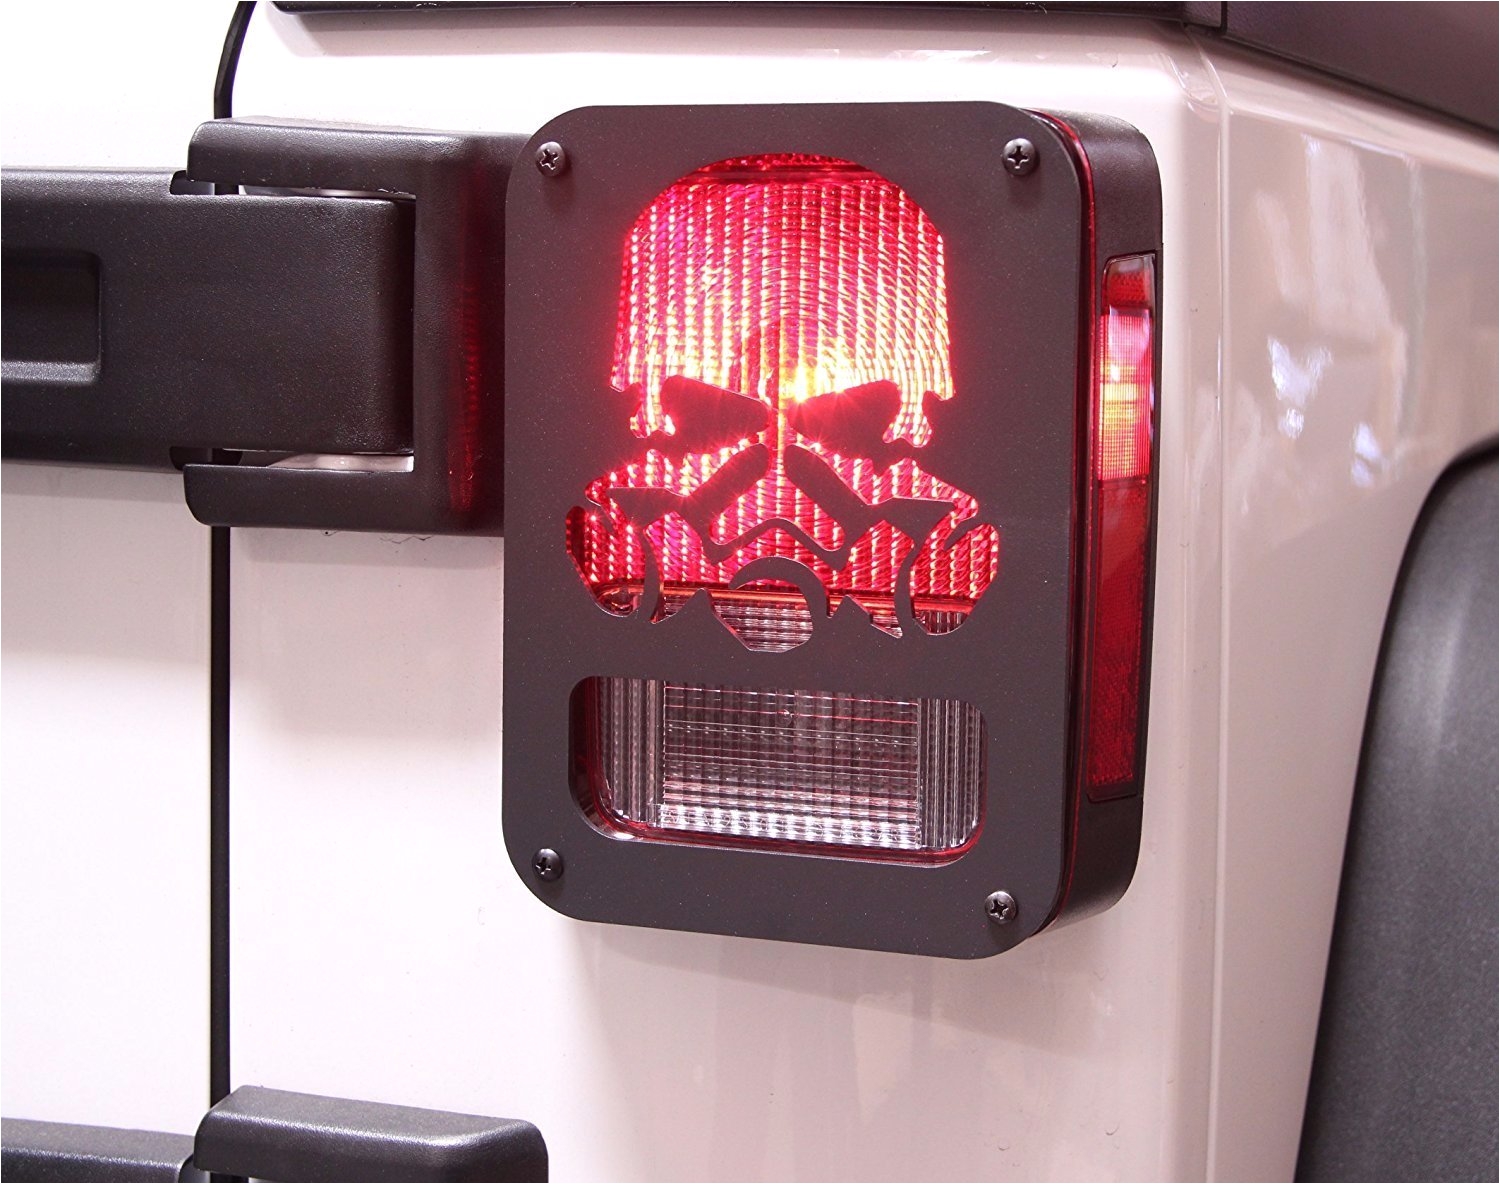 Jeep Jk Tail Light Covers Taillight Covers for 07 17 Jeep Wrangler Jk